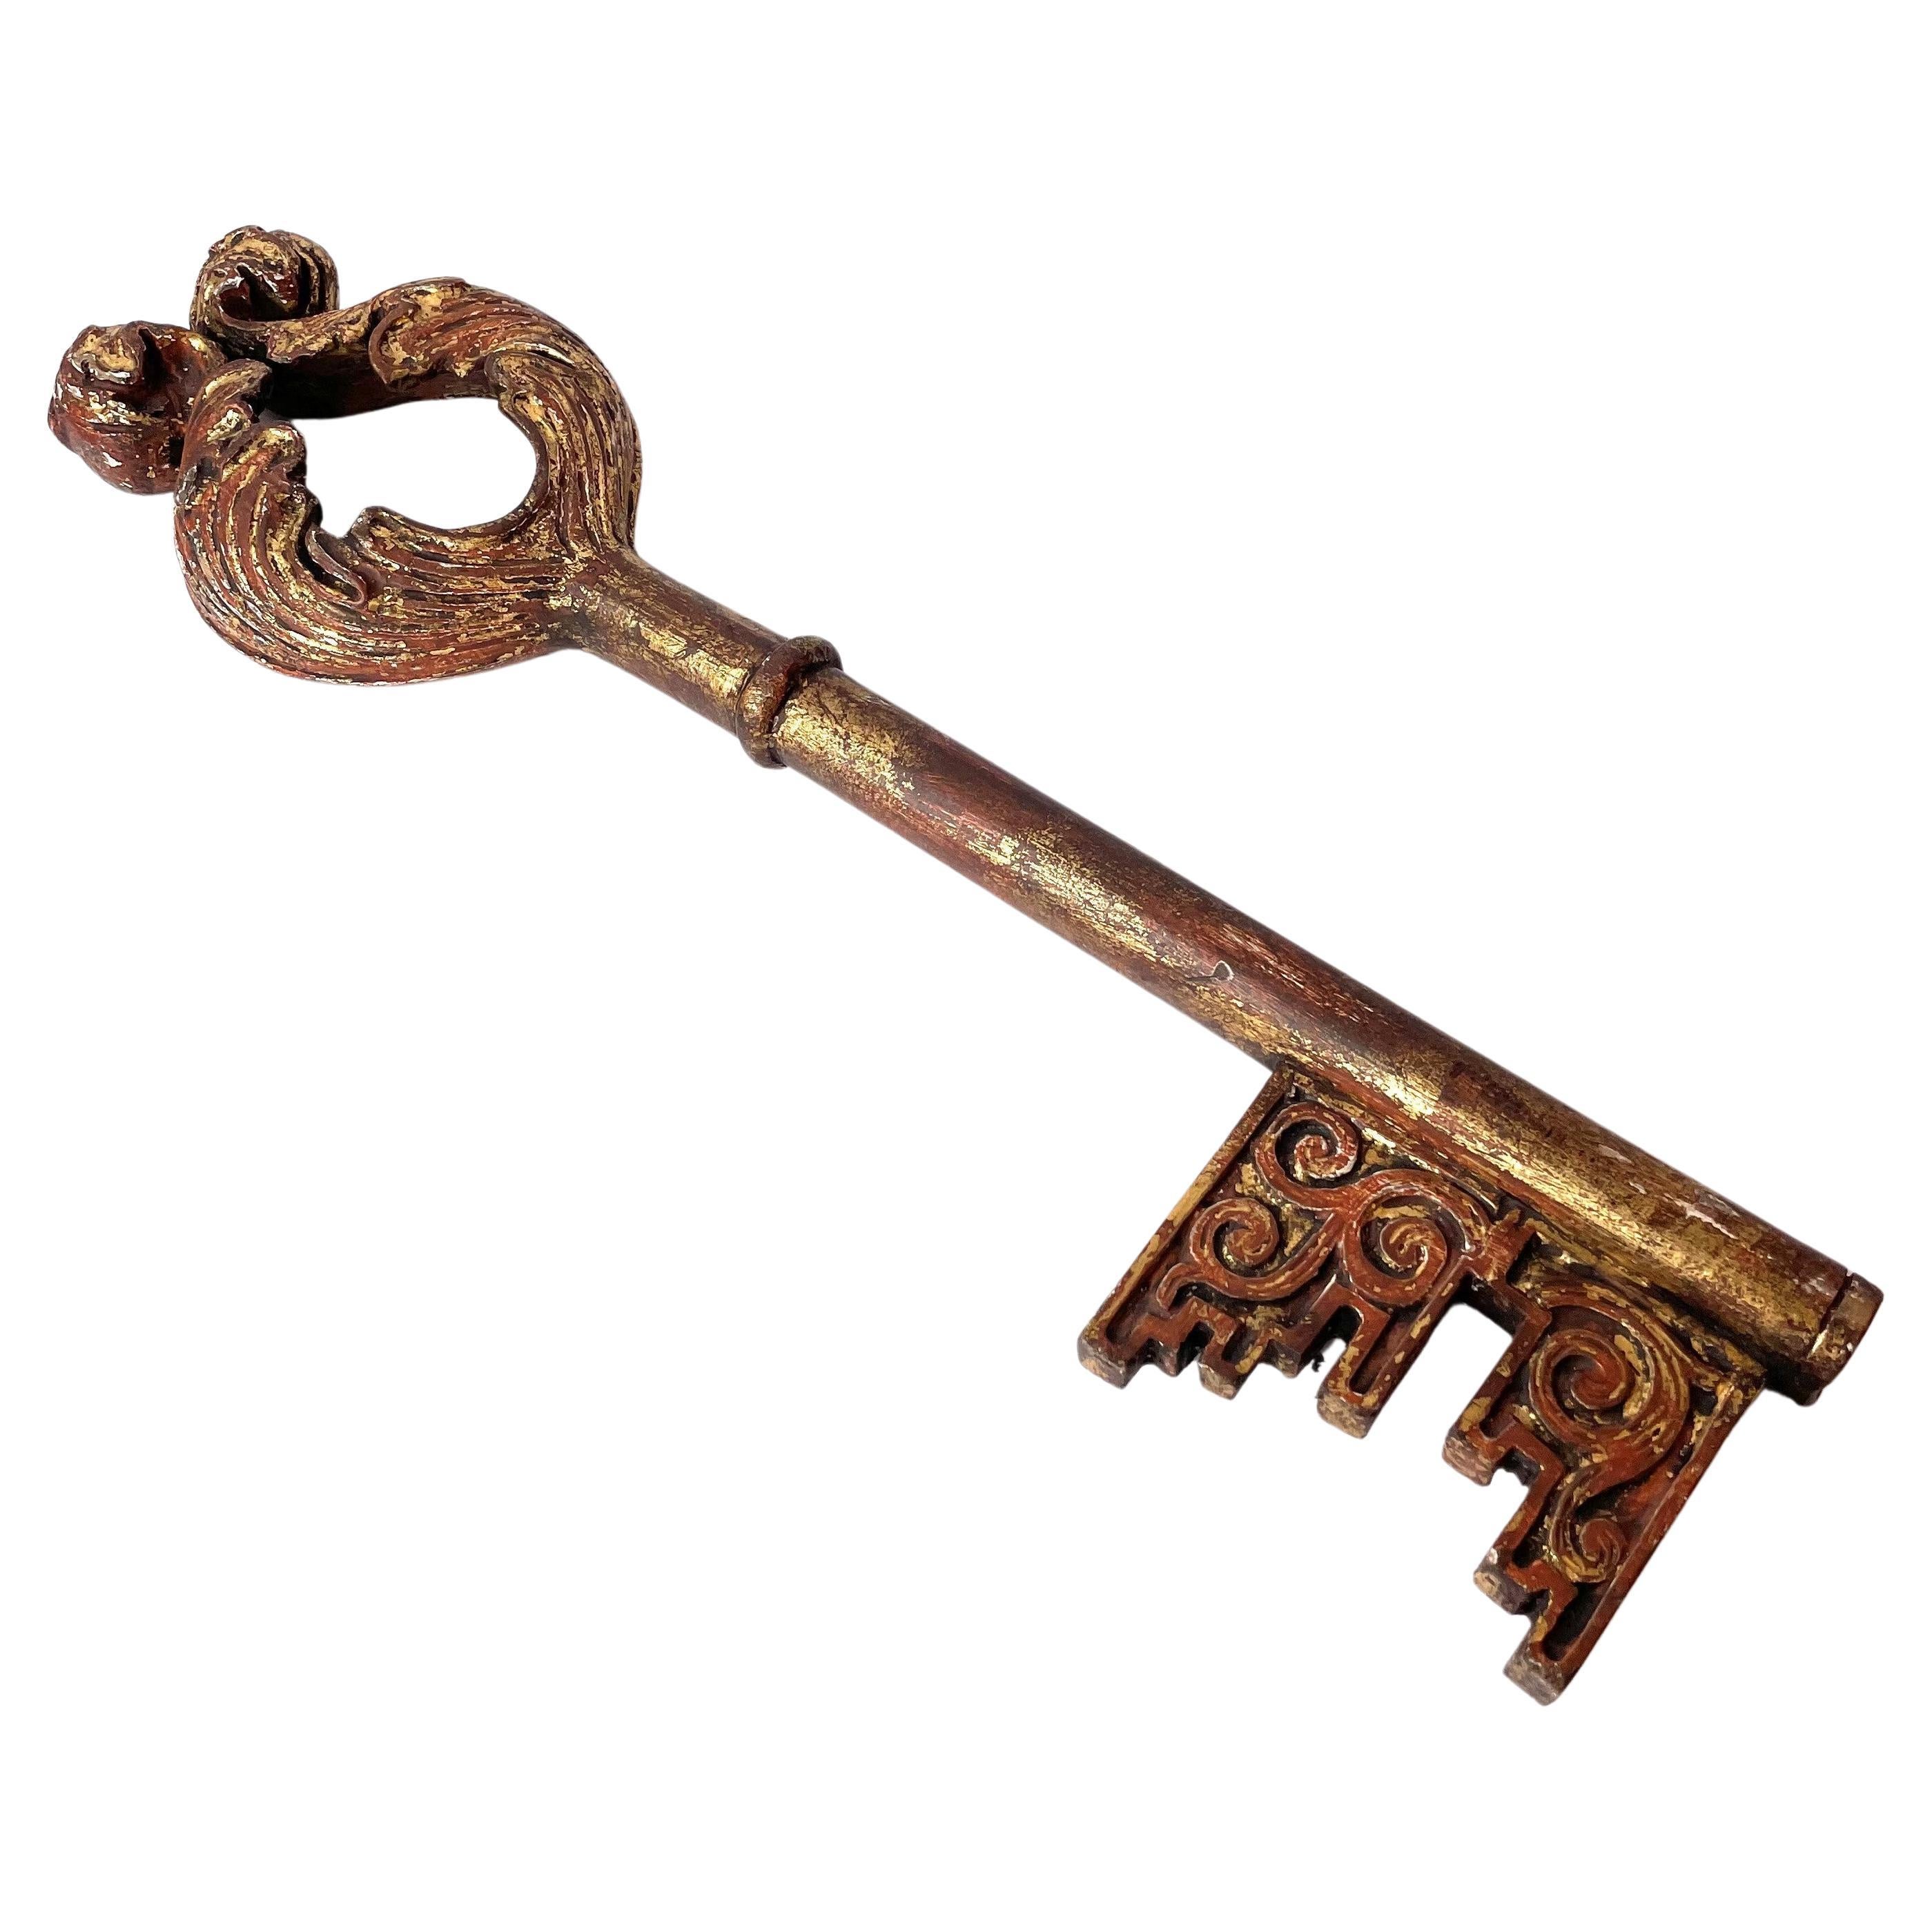 Very Large Woodcut and Gilded Key from the 17th Century